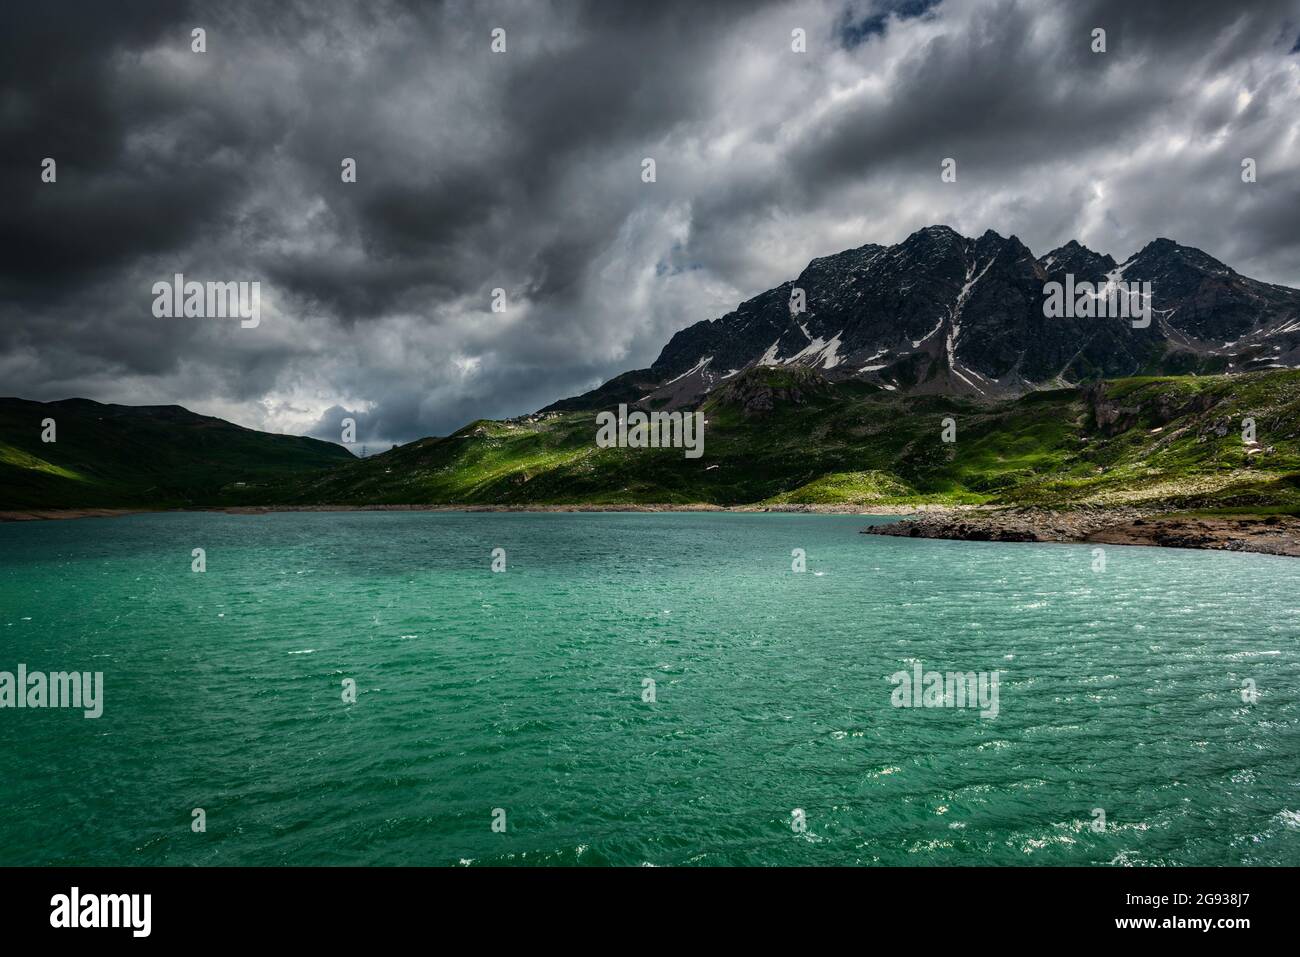 Lake in the Italian Alps with storm clouds in the sky and rays of Sun on the water Stock Photo